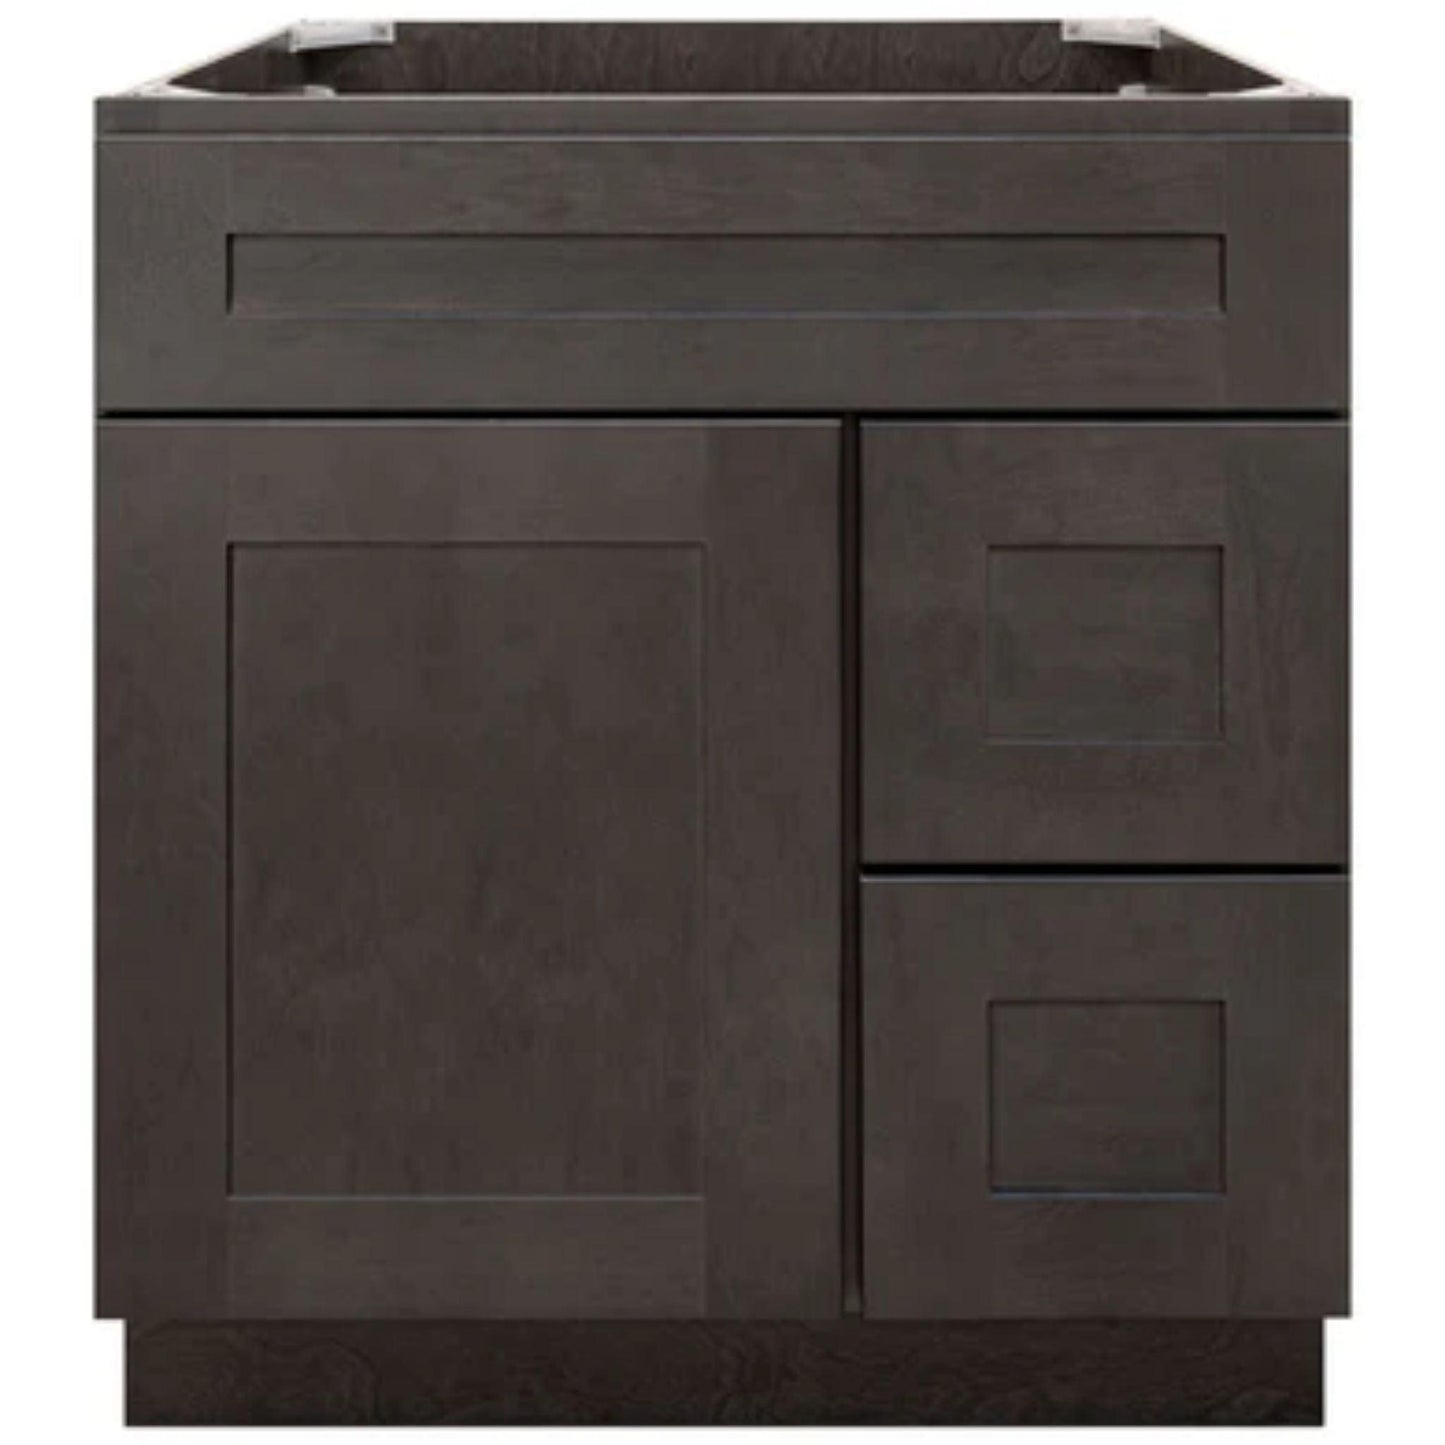 LessCare 30" x 34.5" x 21" Dover Gray Vanity Sink Base Cabinet